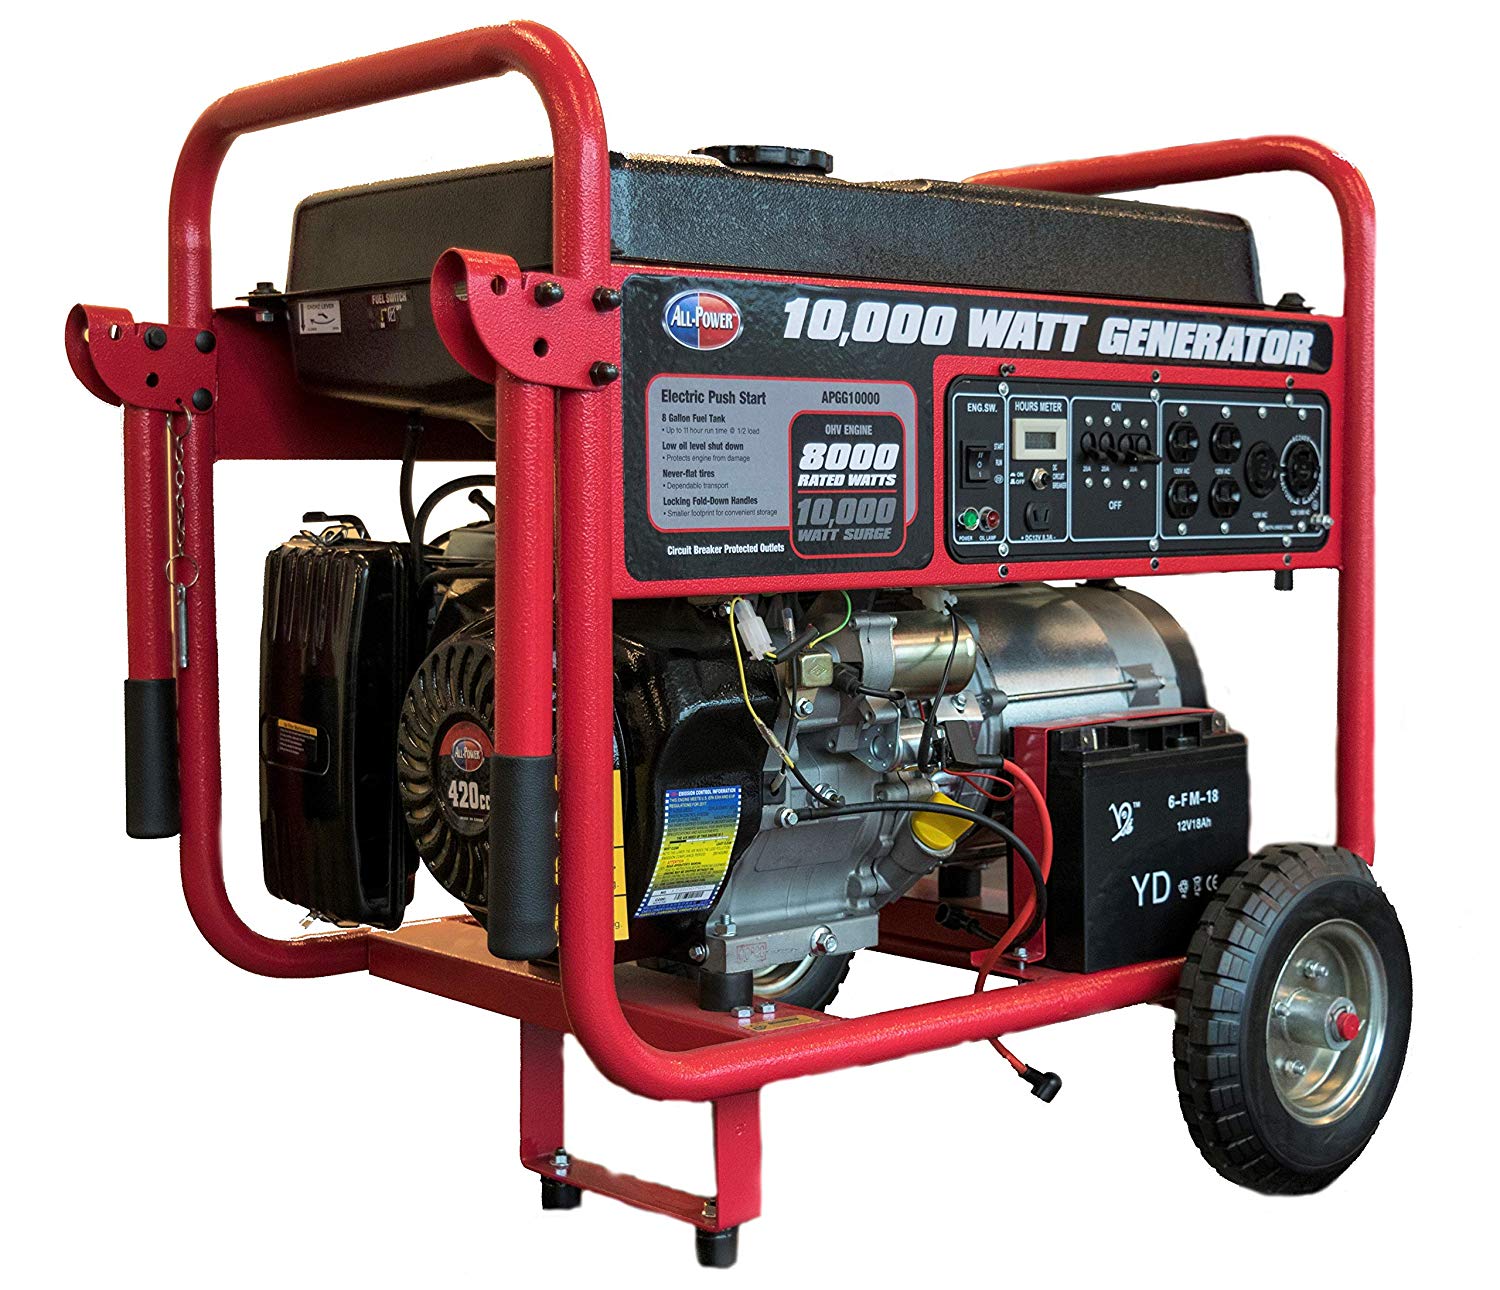 All Power American 10,000-Watt Gas Portable Generator with Electric Start Only $526.77 (Reg $749)